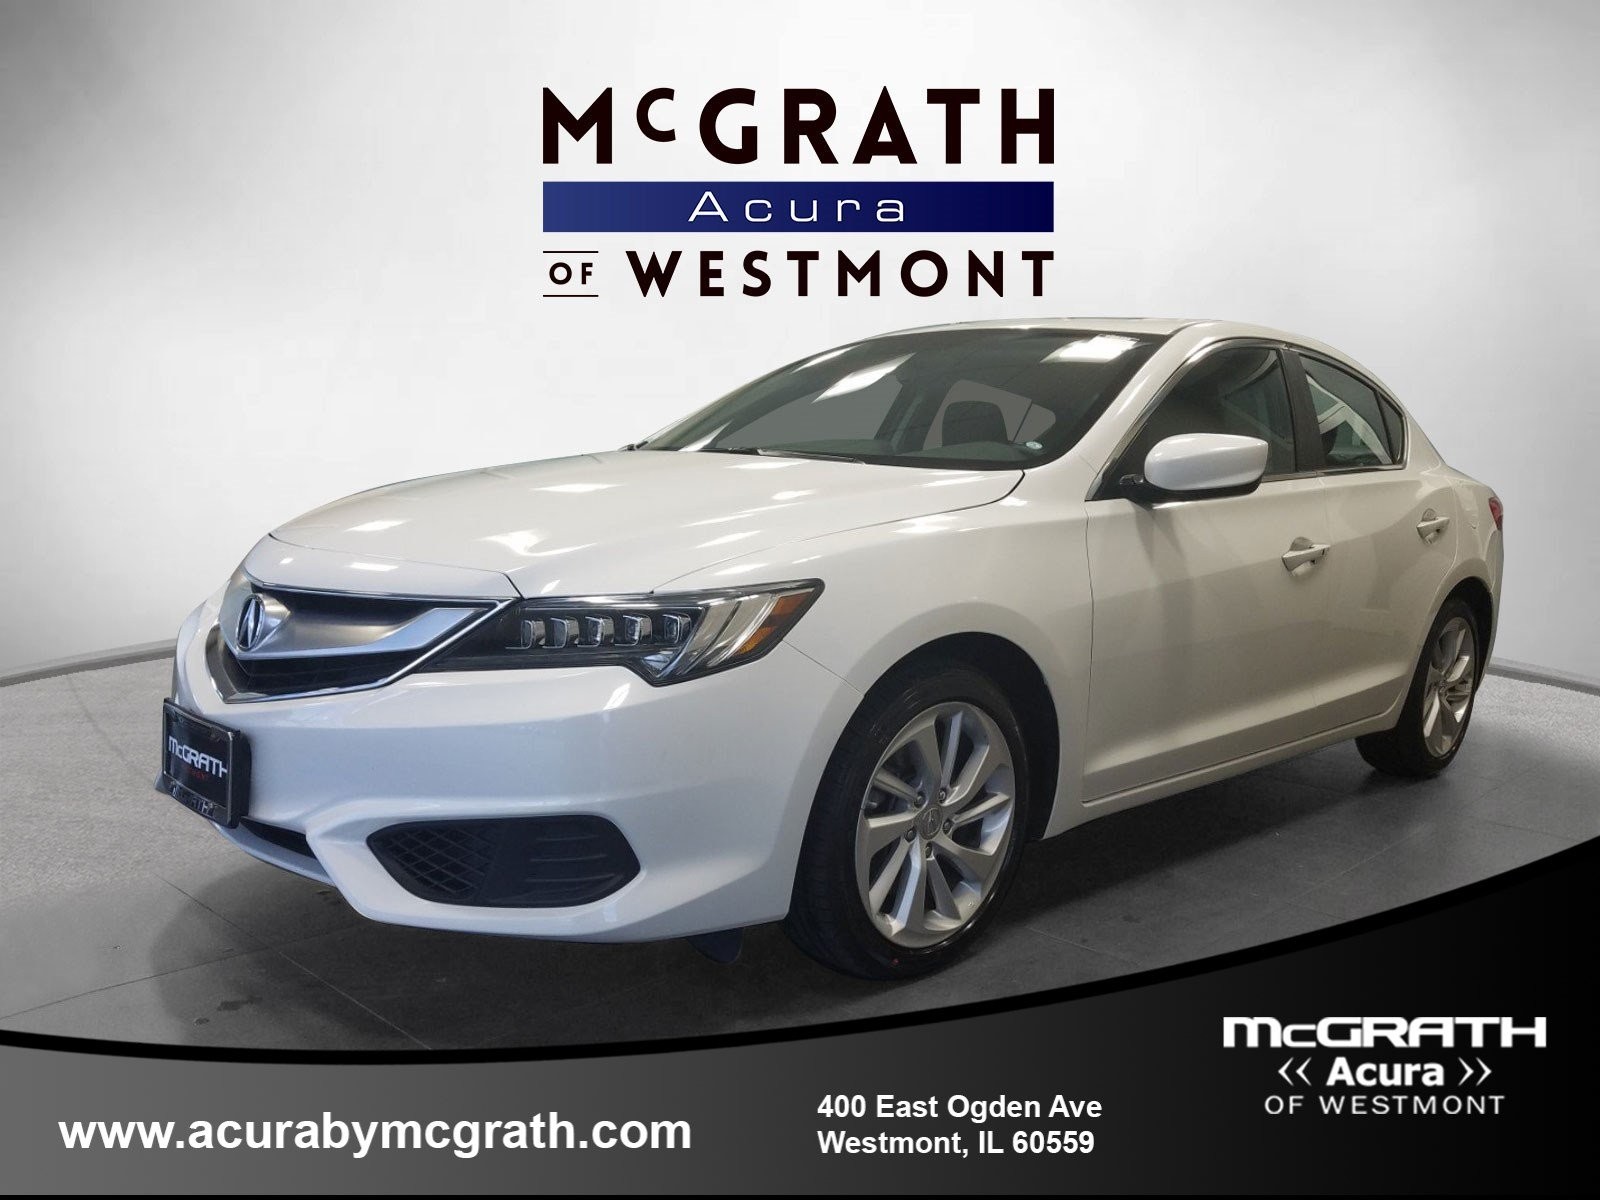 Acura Rl Parts Diagram Certified Pre Owned 2017 Acura Ilx Base 4dr Car In Westmont Pb9409 Of Acura Rl Parts Diagram